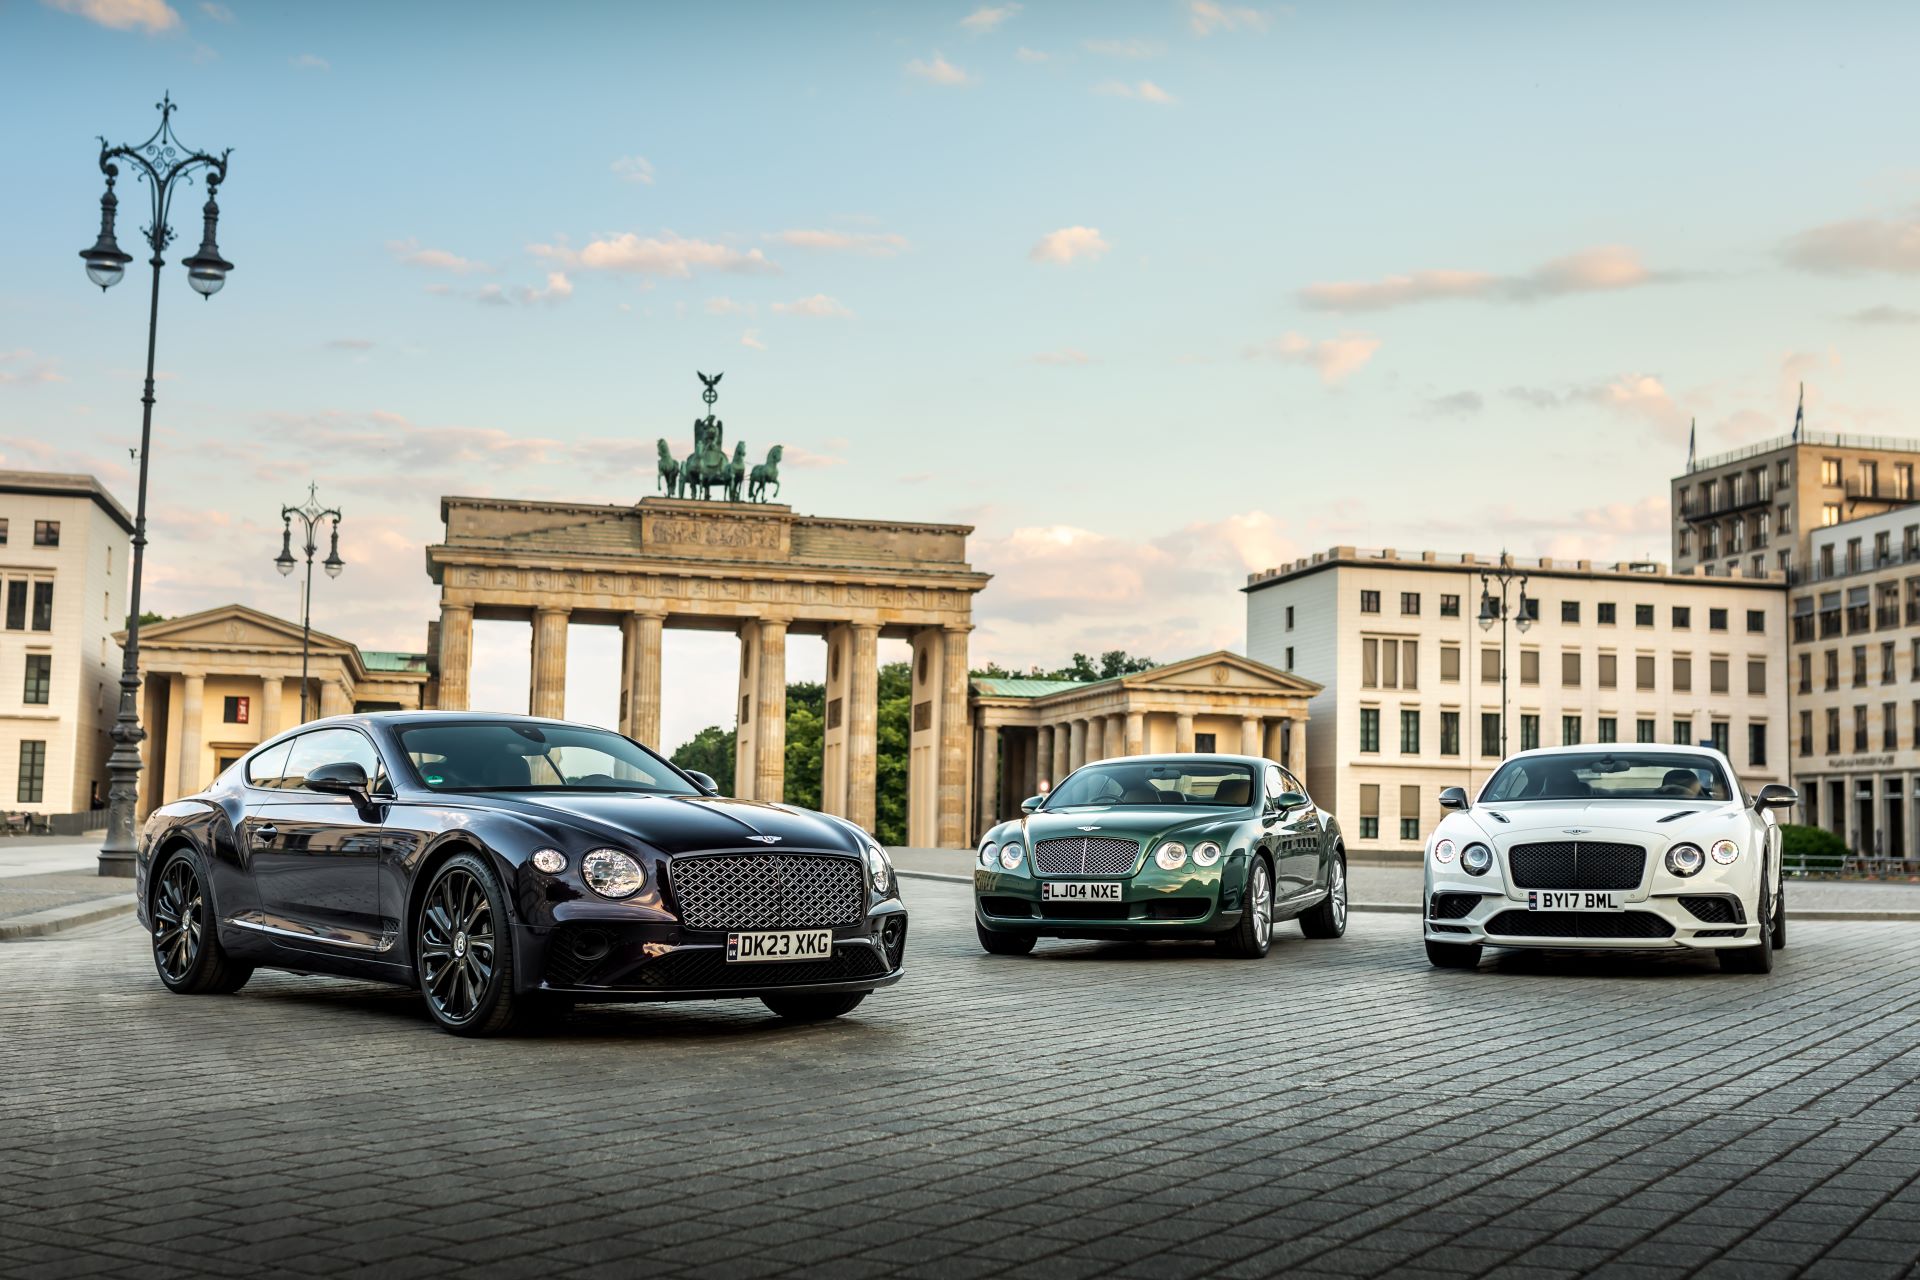 Continental GT 20th anniversary Baton completes lap of the world